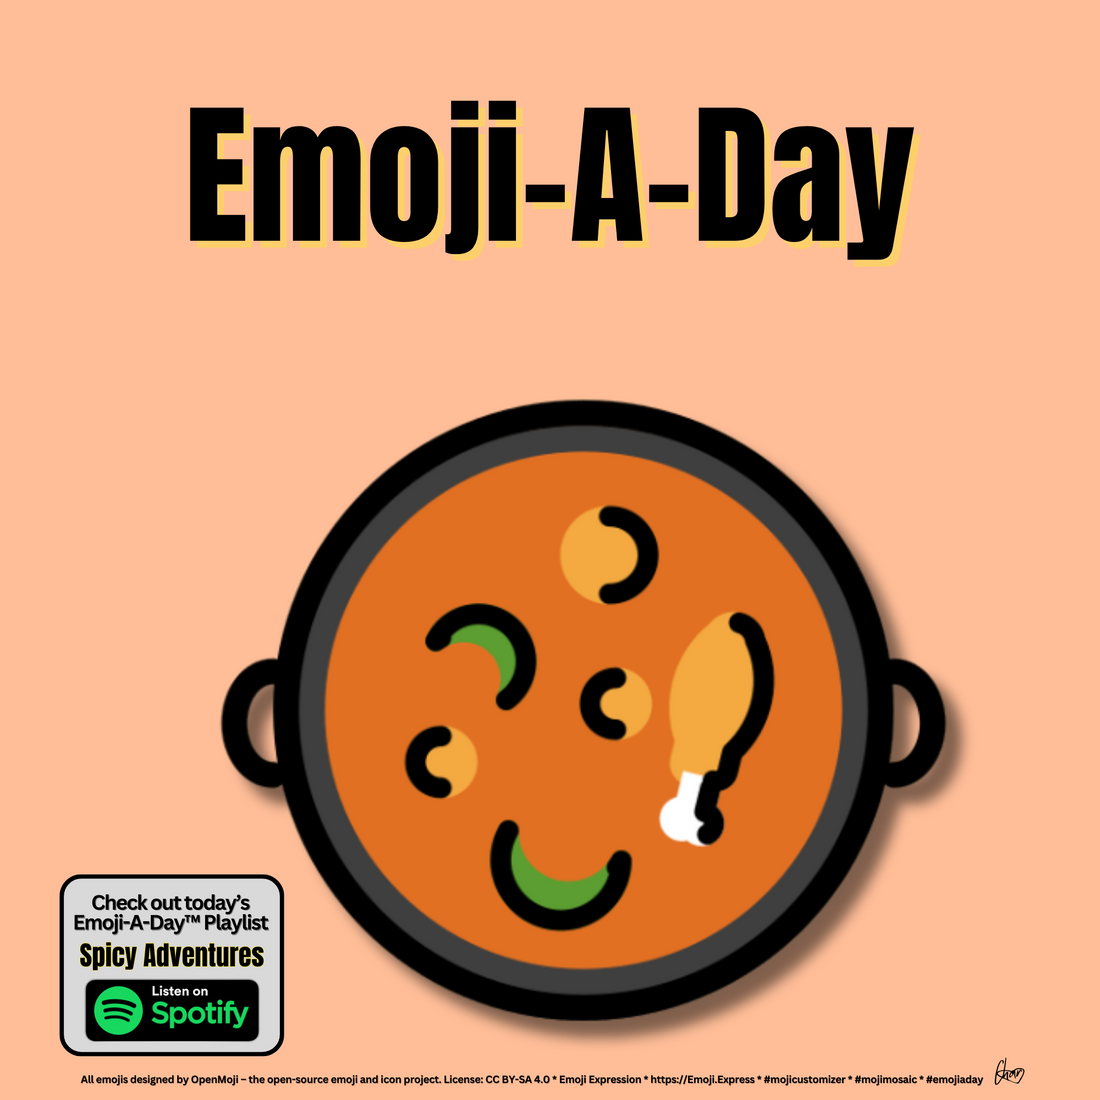 Emoij-A-Day theme with Pot of Food emoji and Spicy Adventures Playlist